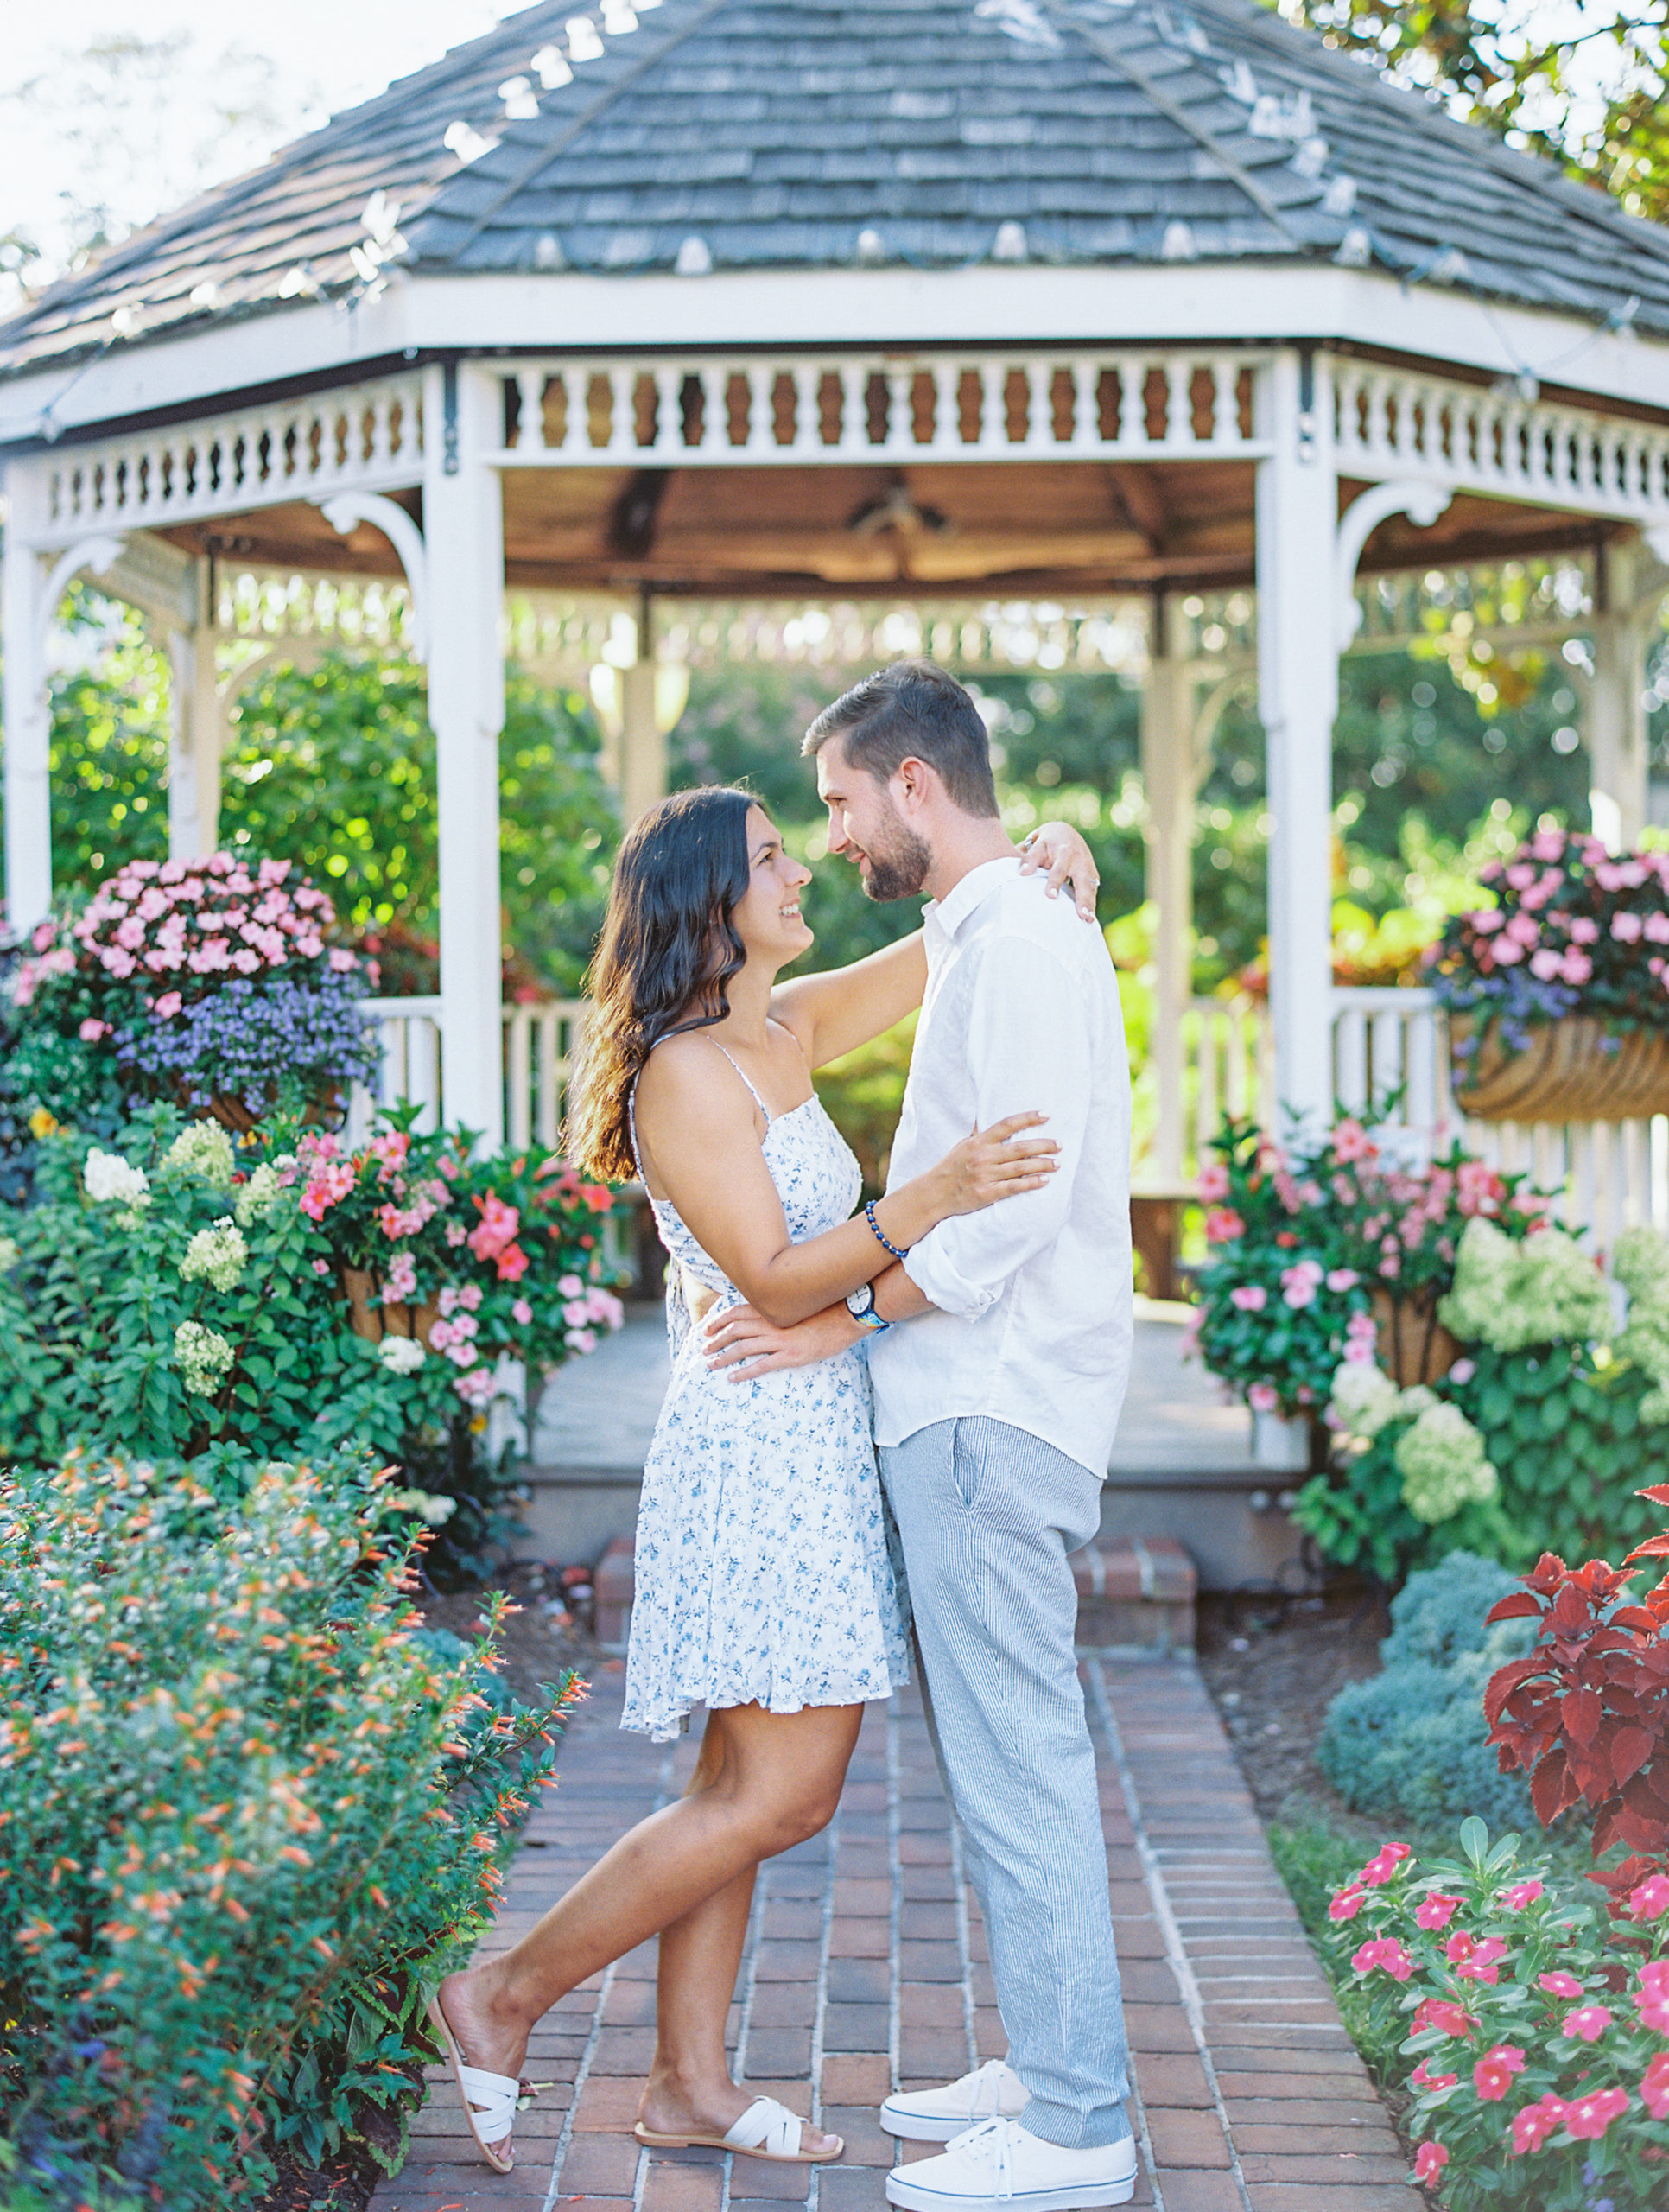 Couple embraces and smiles in front of gazebo garden 